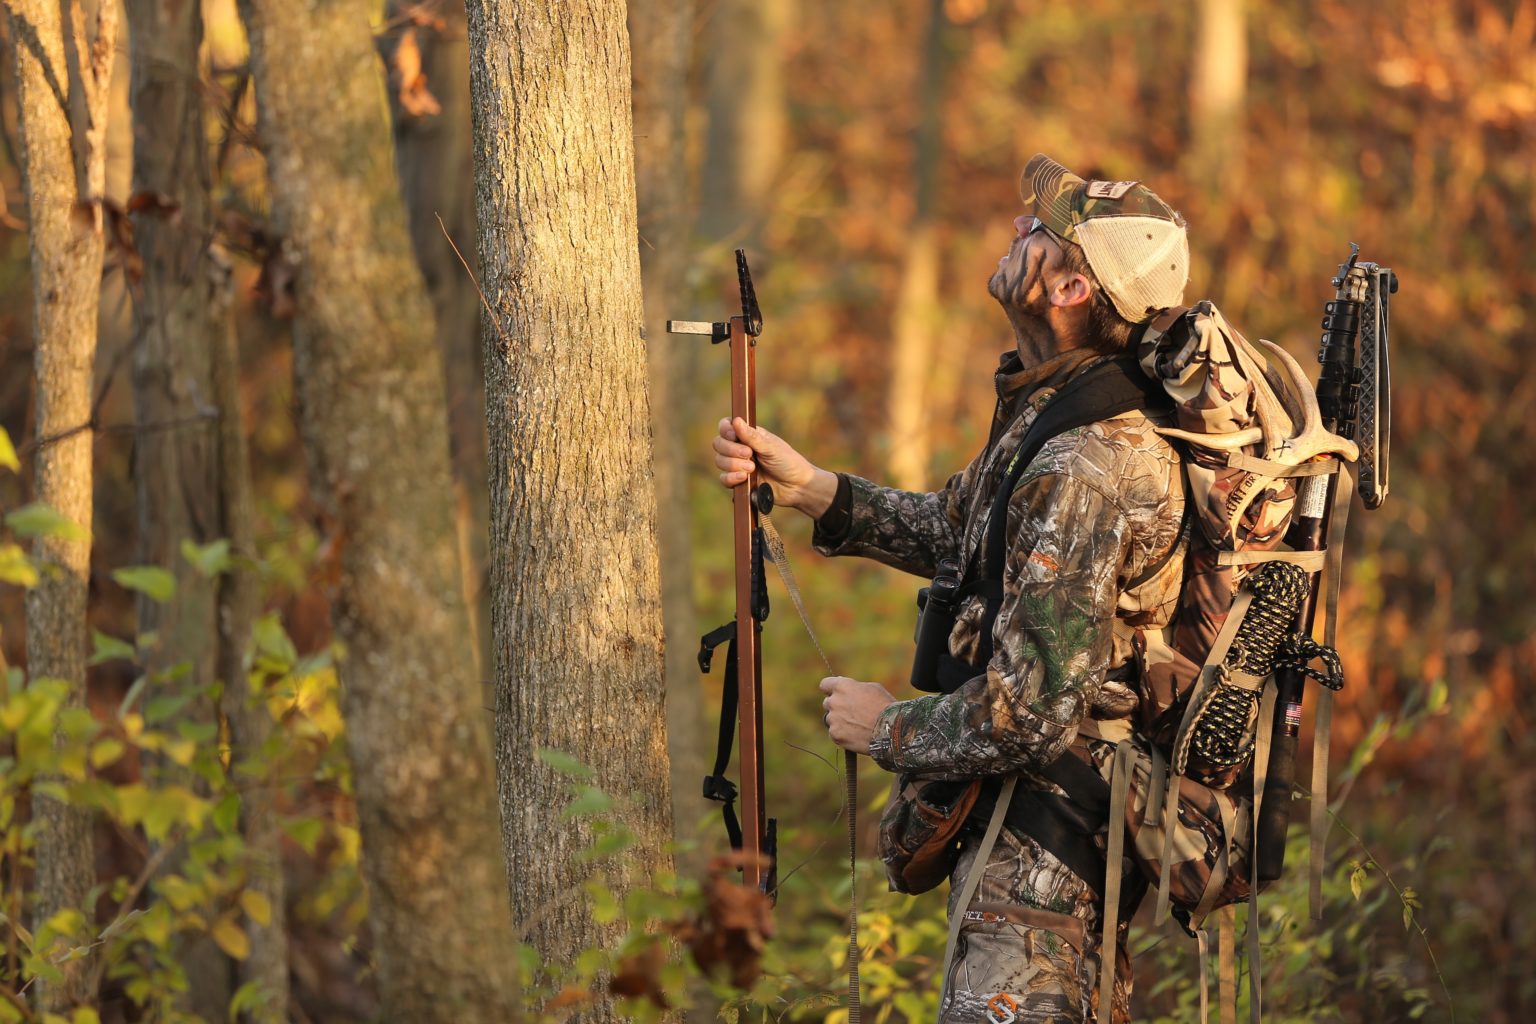 How To Hang A Treestand | Bowhunting.com